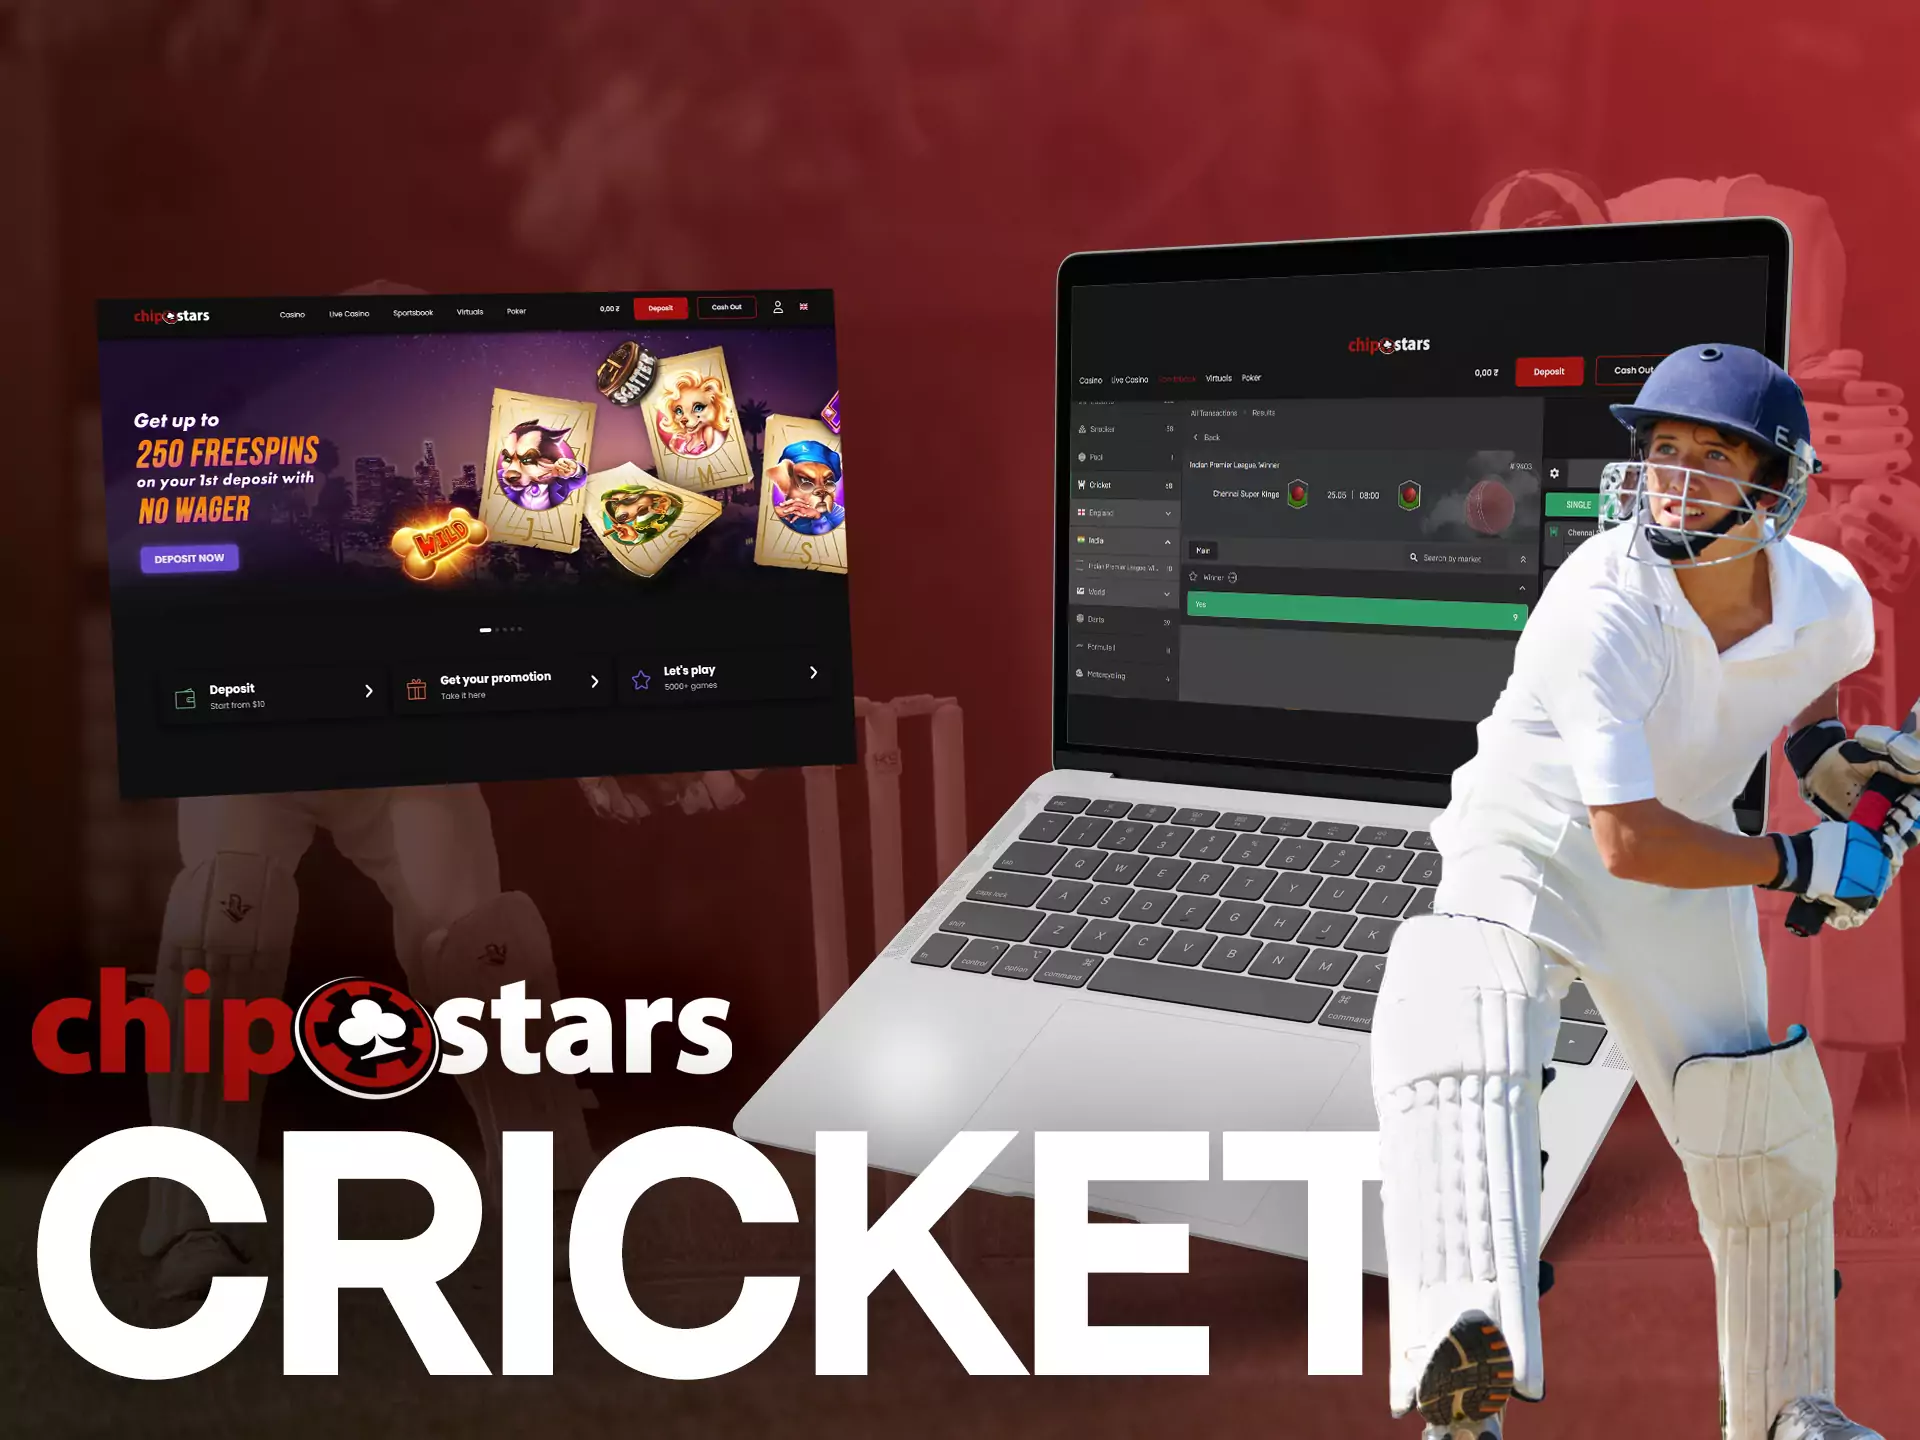 In the line and live sections, you find all the available cricket matches on Chipstars.